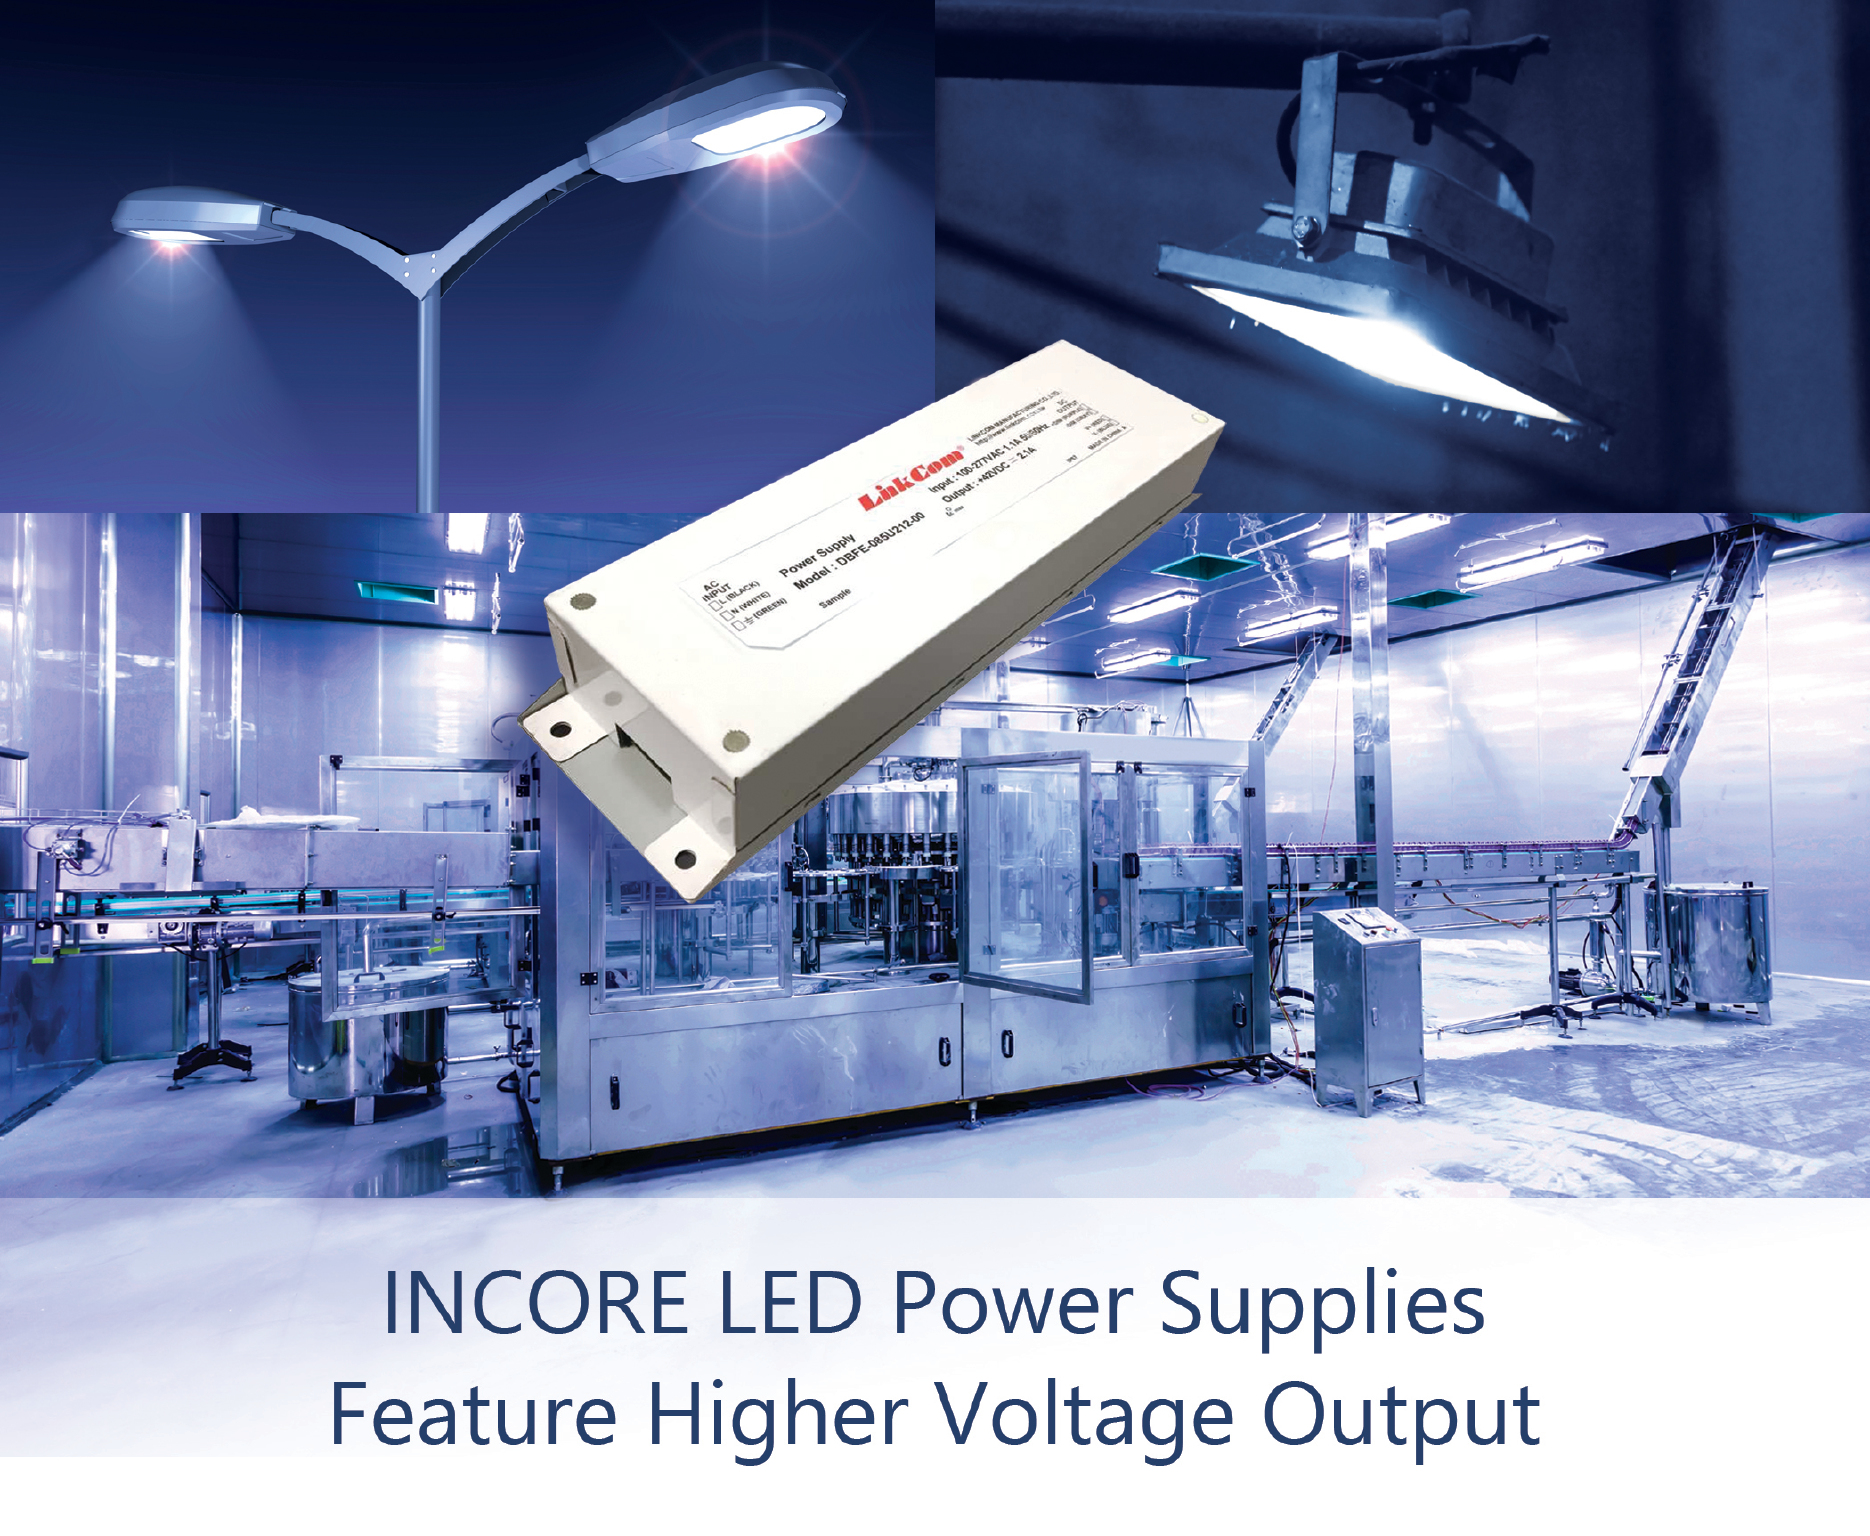 LED Power Supplies Deliver Constant Current at Output Voltage Levels Required for High-Lumen-Output Applications